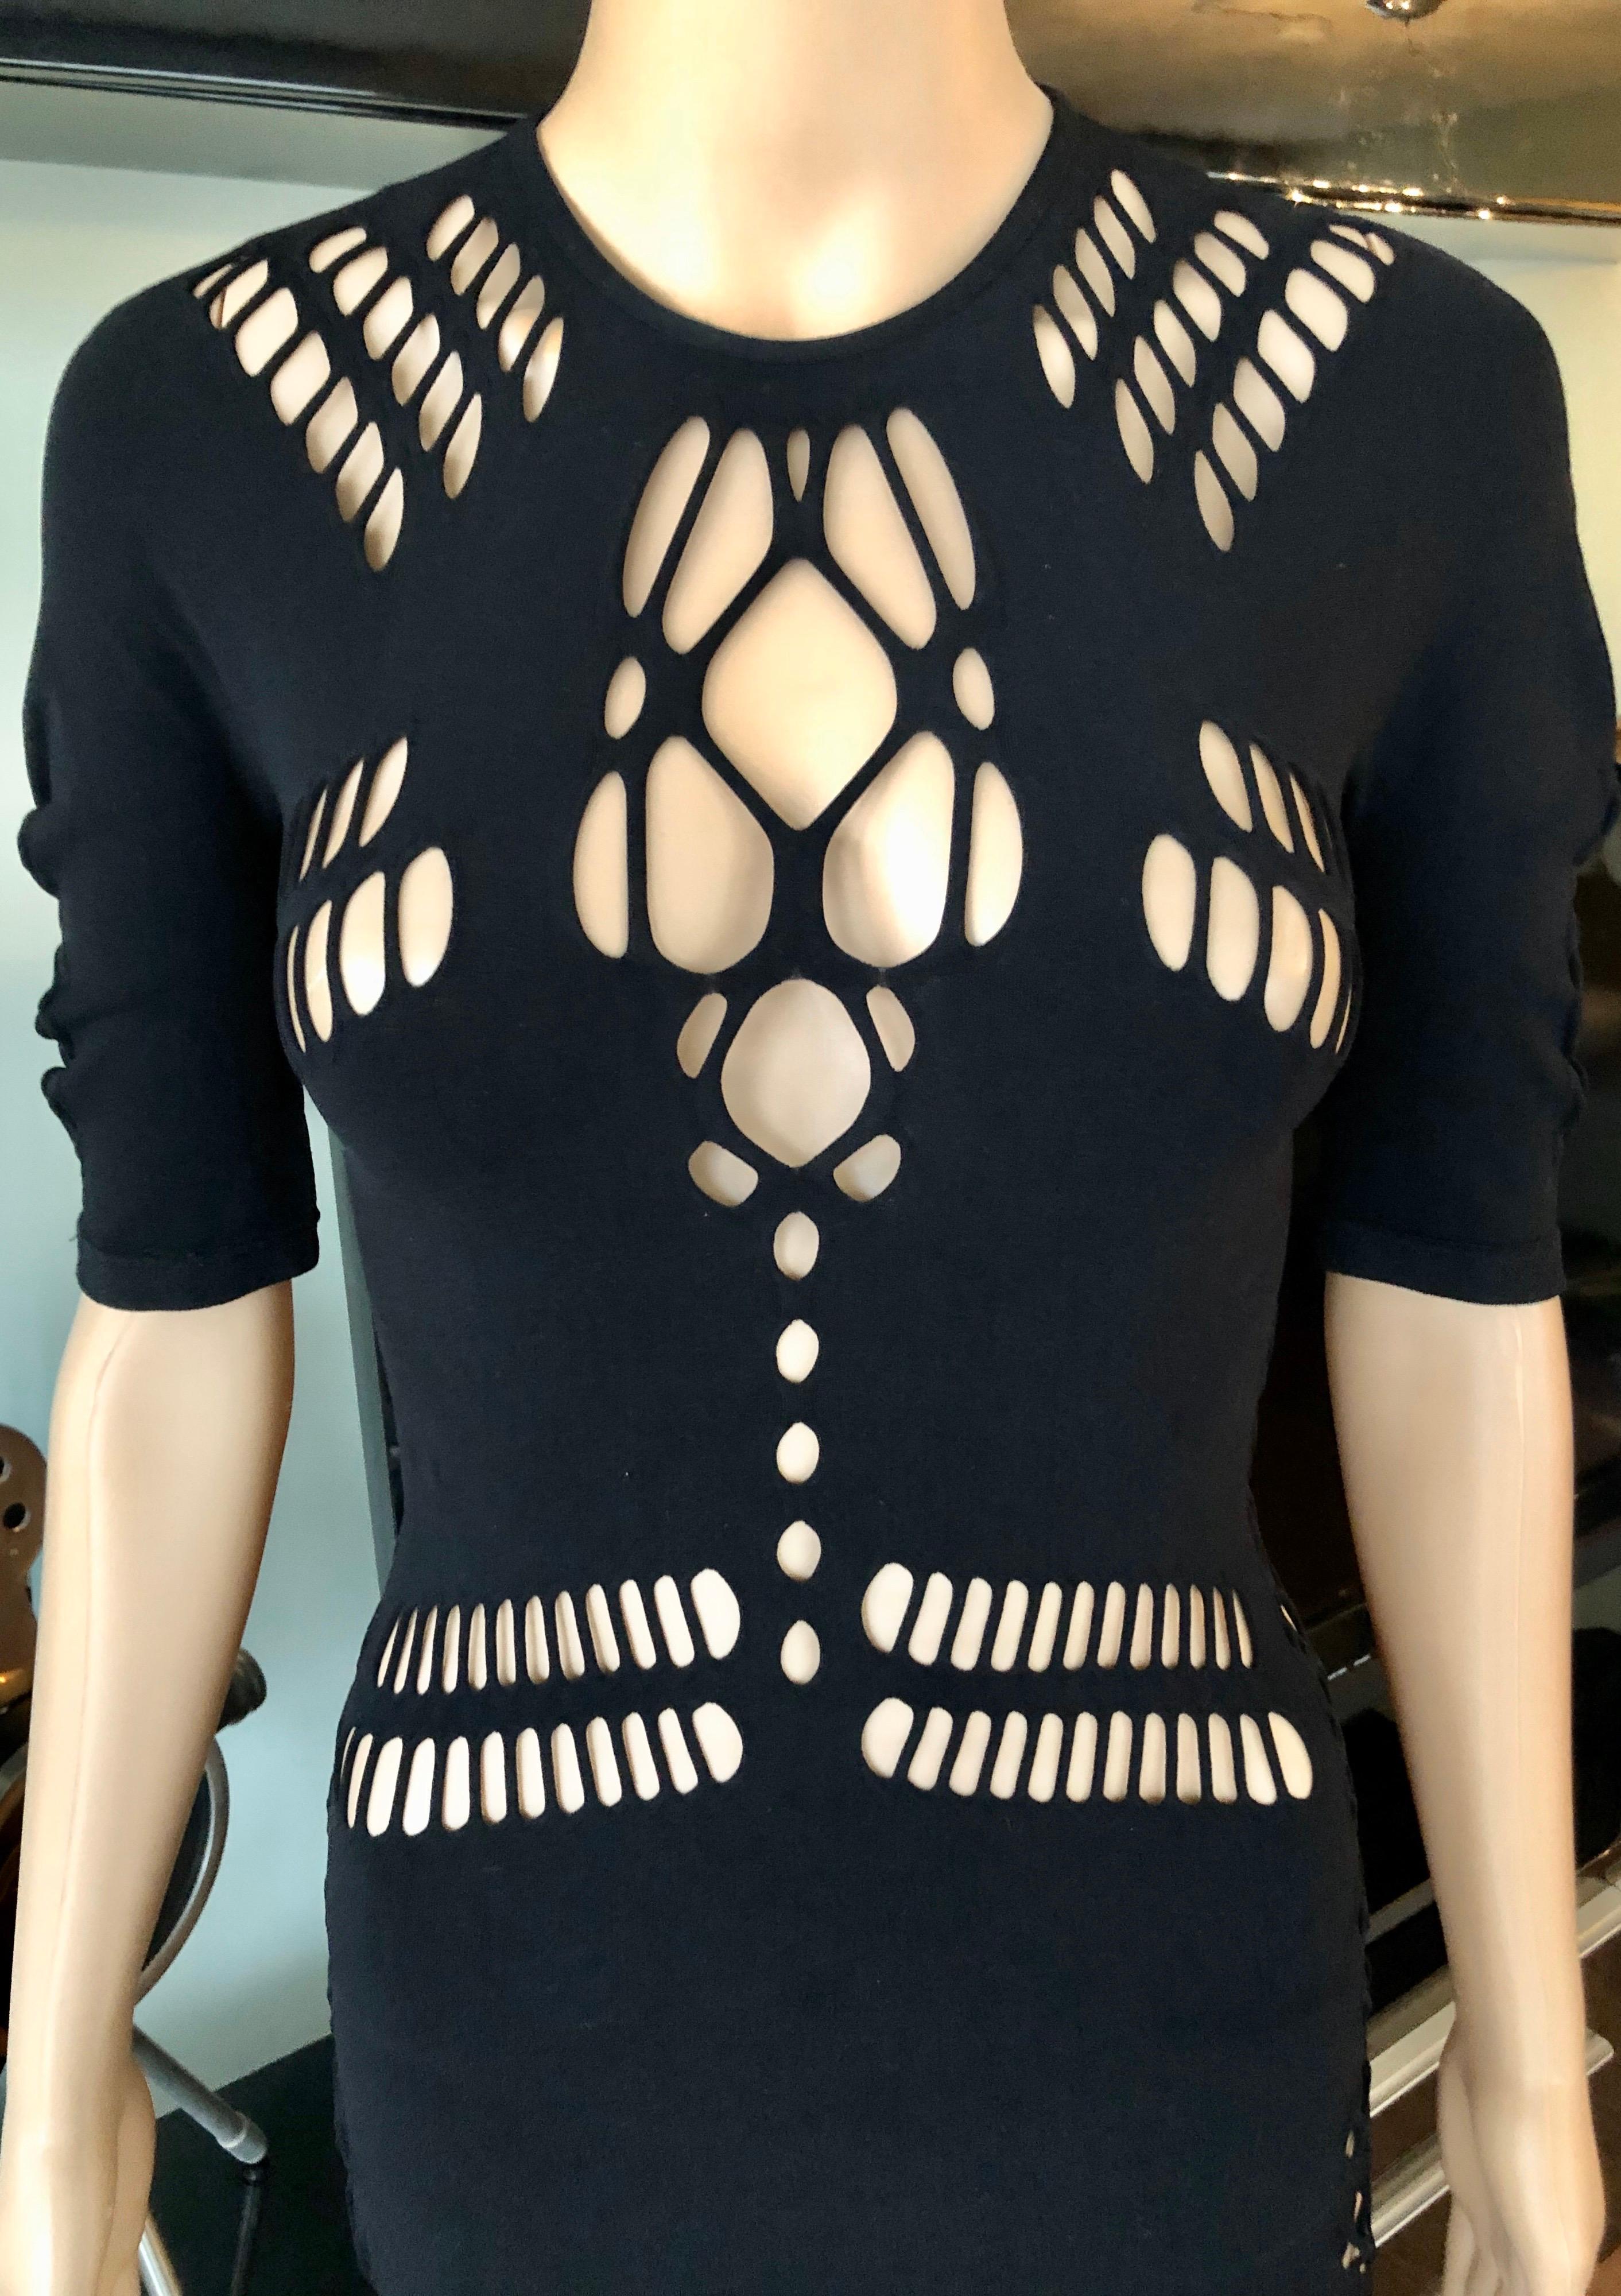 Gucci Cutout Fishnet Mesh Black Top S/M

Please note size and fabric tags are missing. Please find the approximate measurements below:
Chest: 13-20